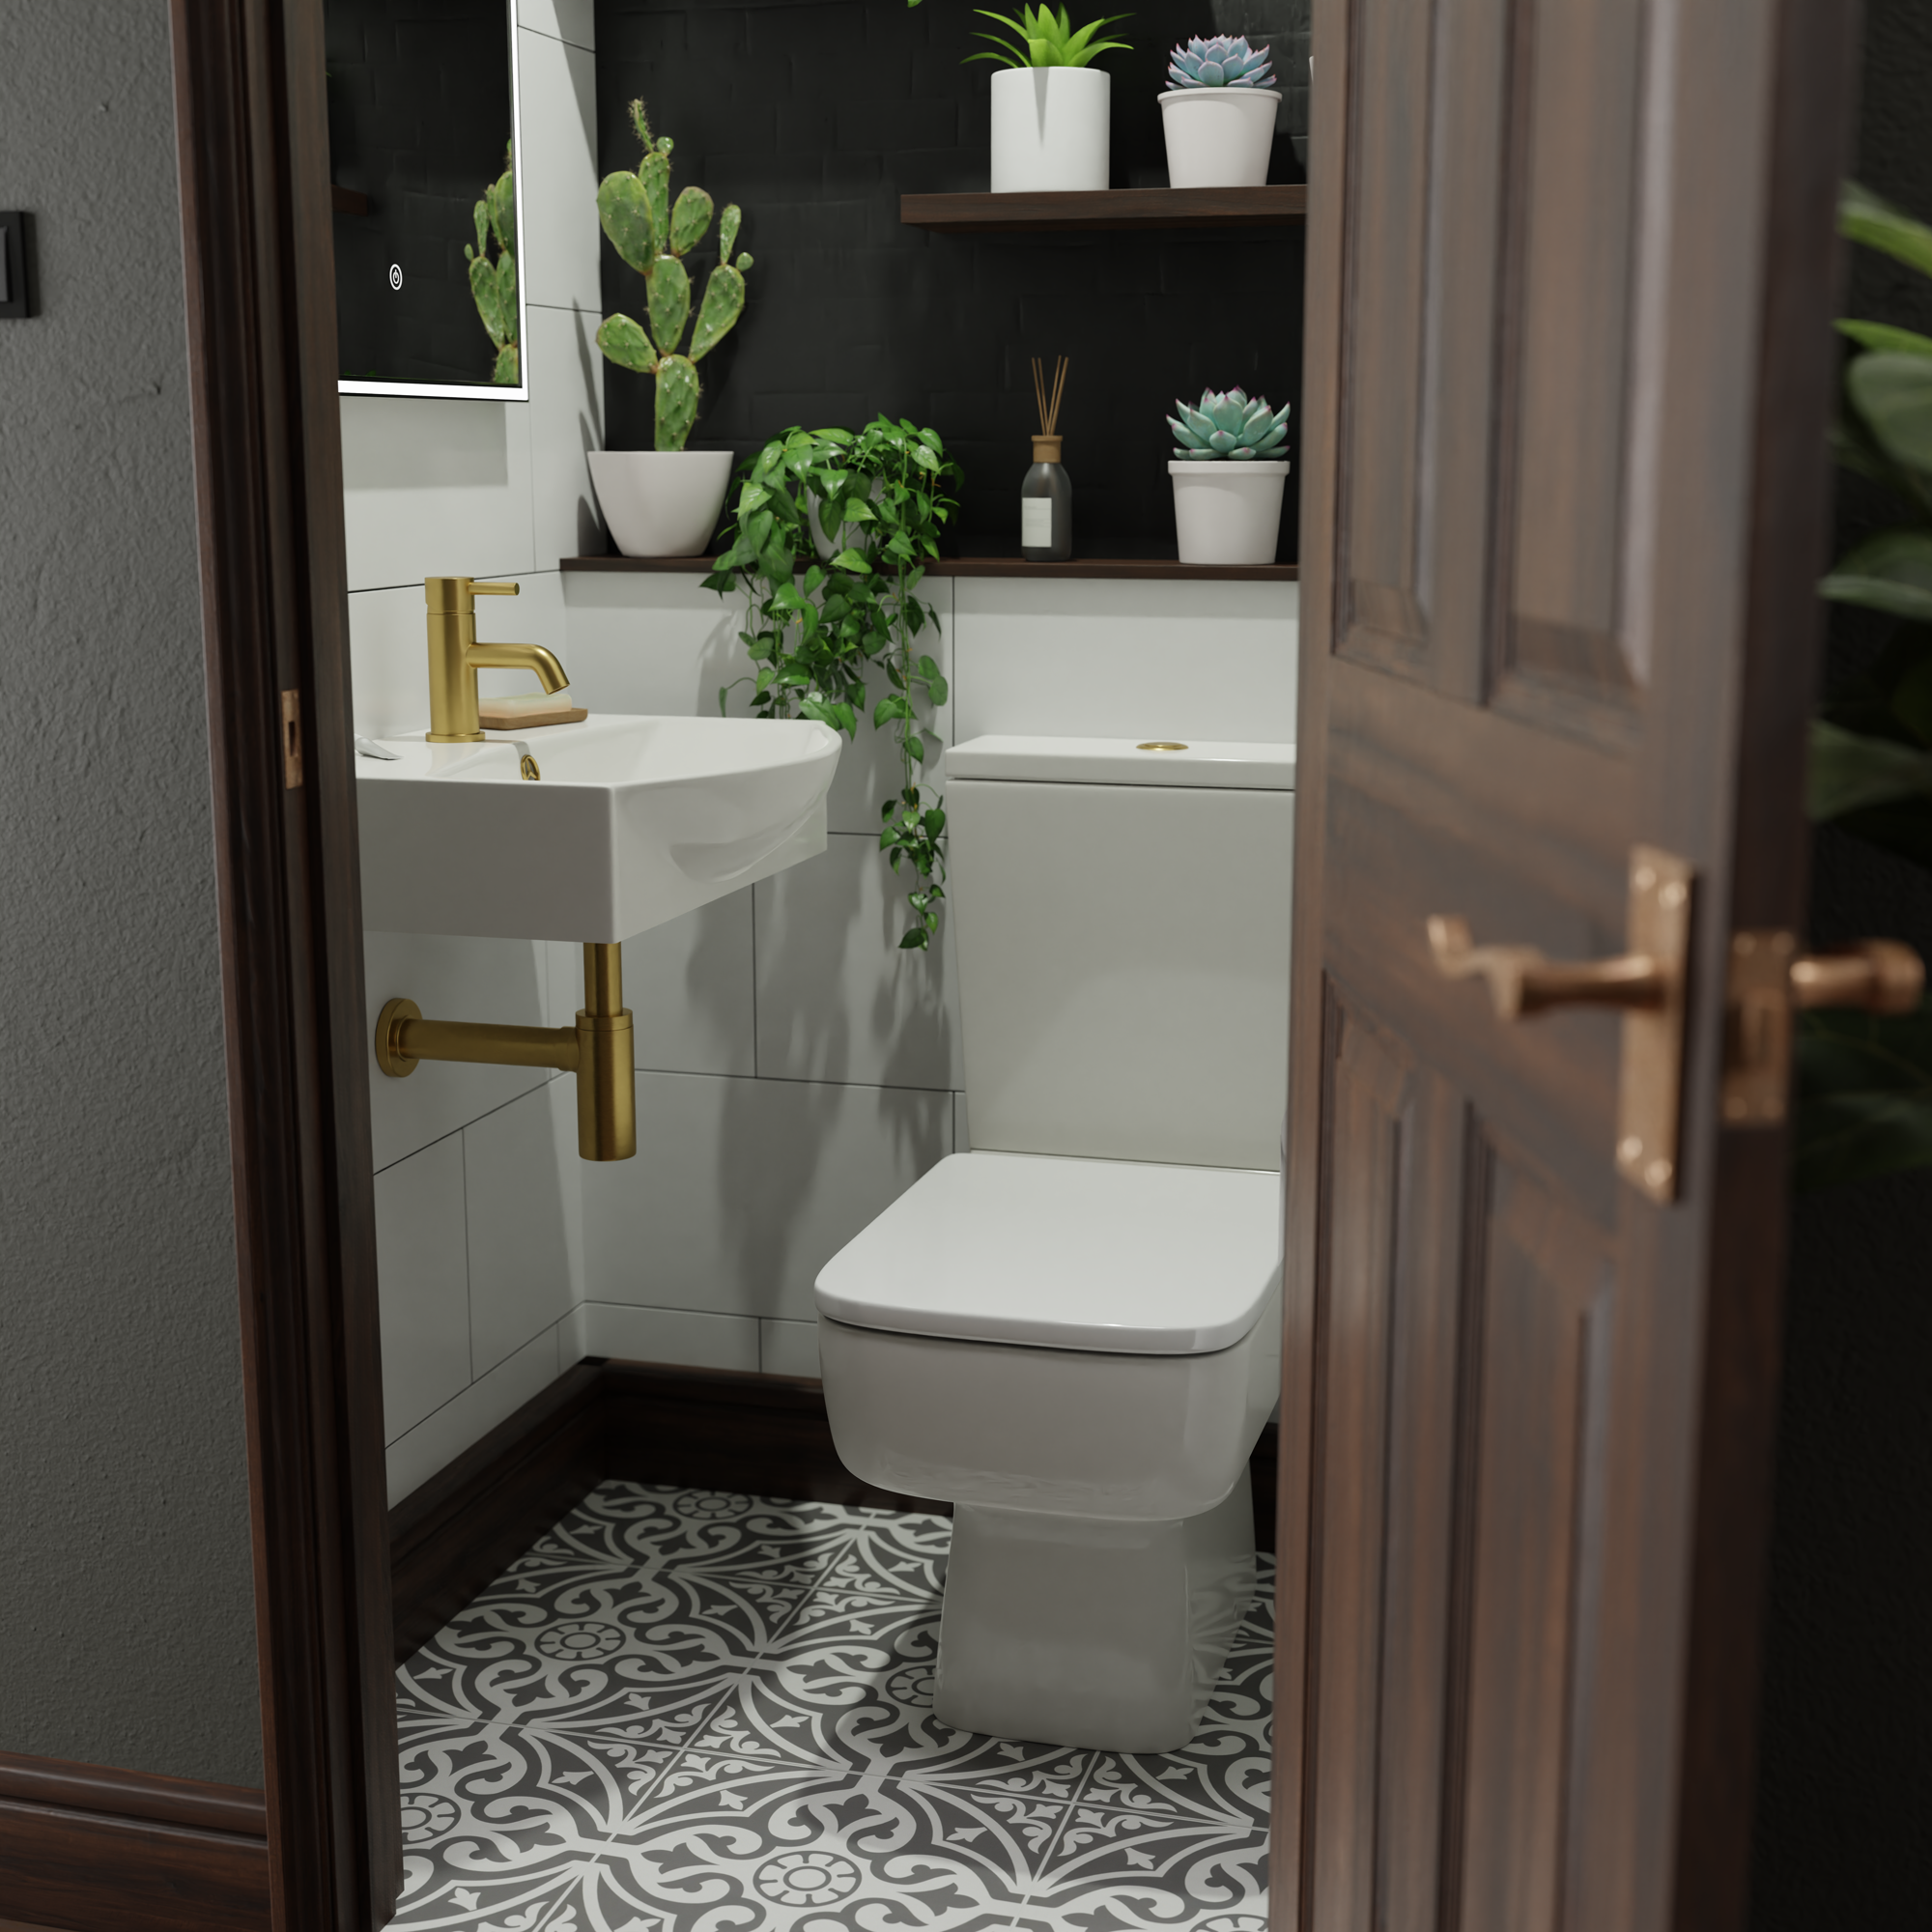 Cloakroom bathroom with patterned floor and greenery